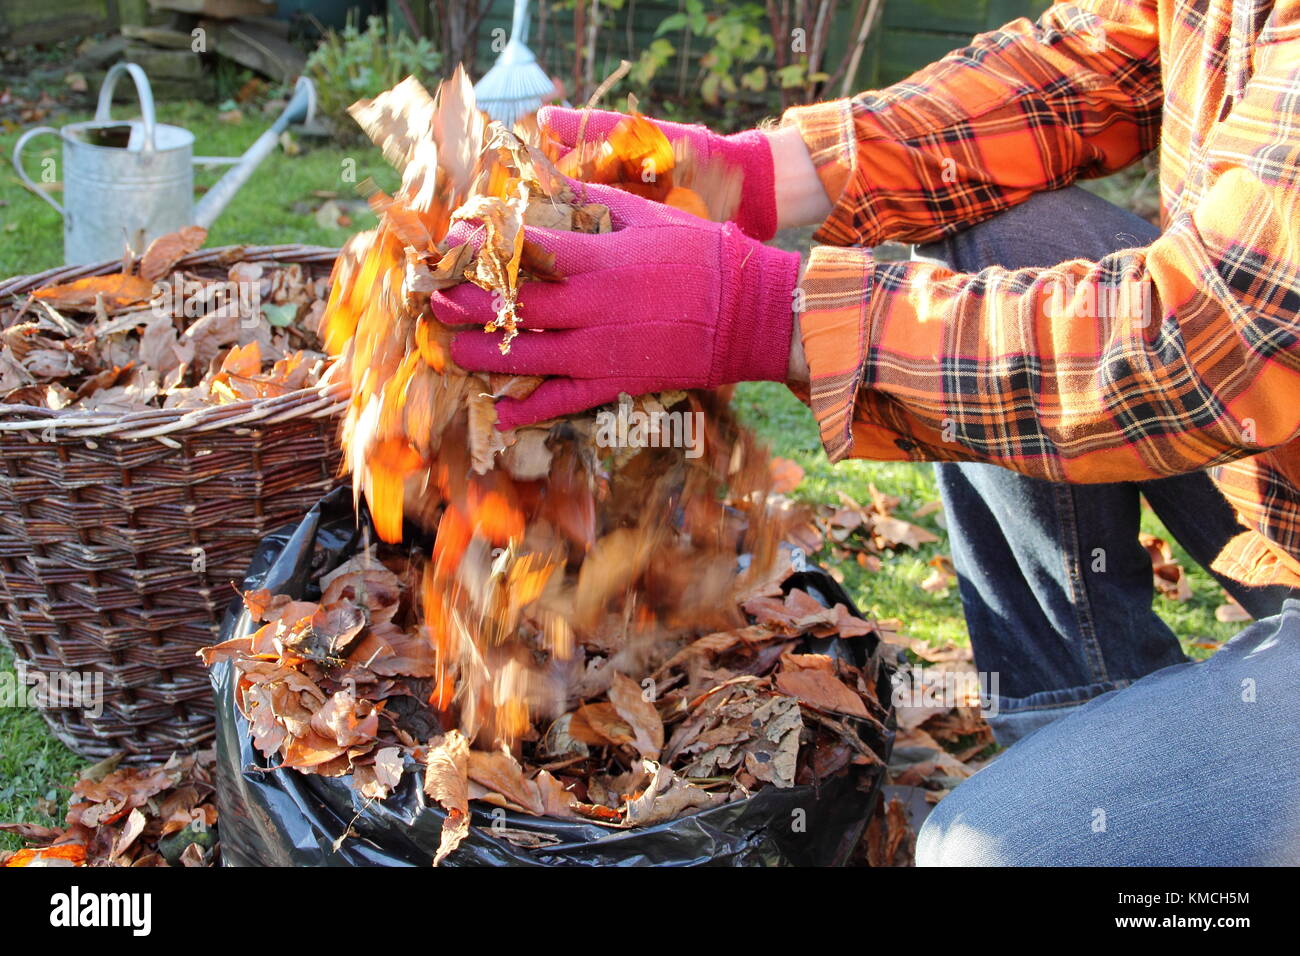 Autumn leaves are gathered into a black plastic bag to make leaf mould by the process of rotting down during over-winter storage in an English garden Stock Photo